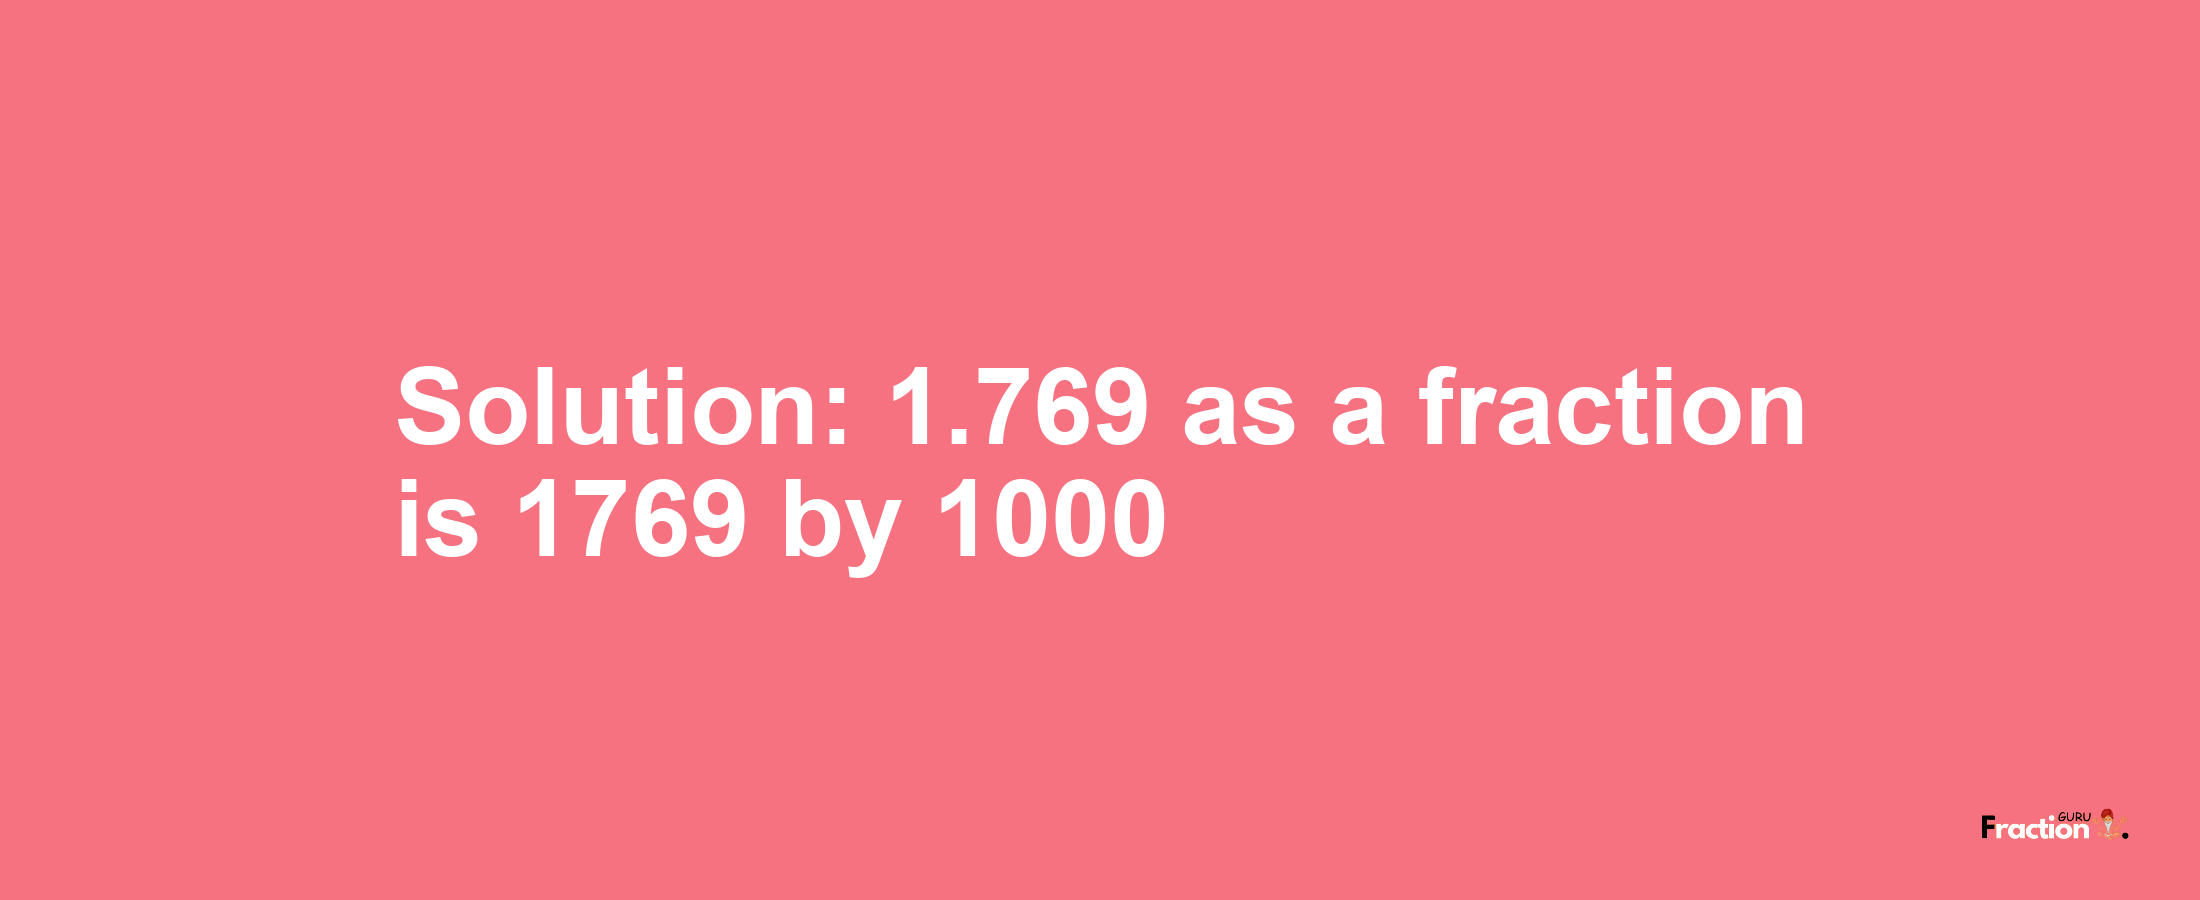 Solution:1.769 as a fraction is 1769/1000